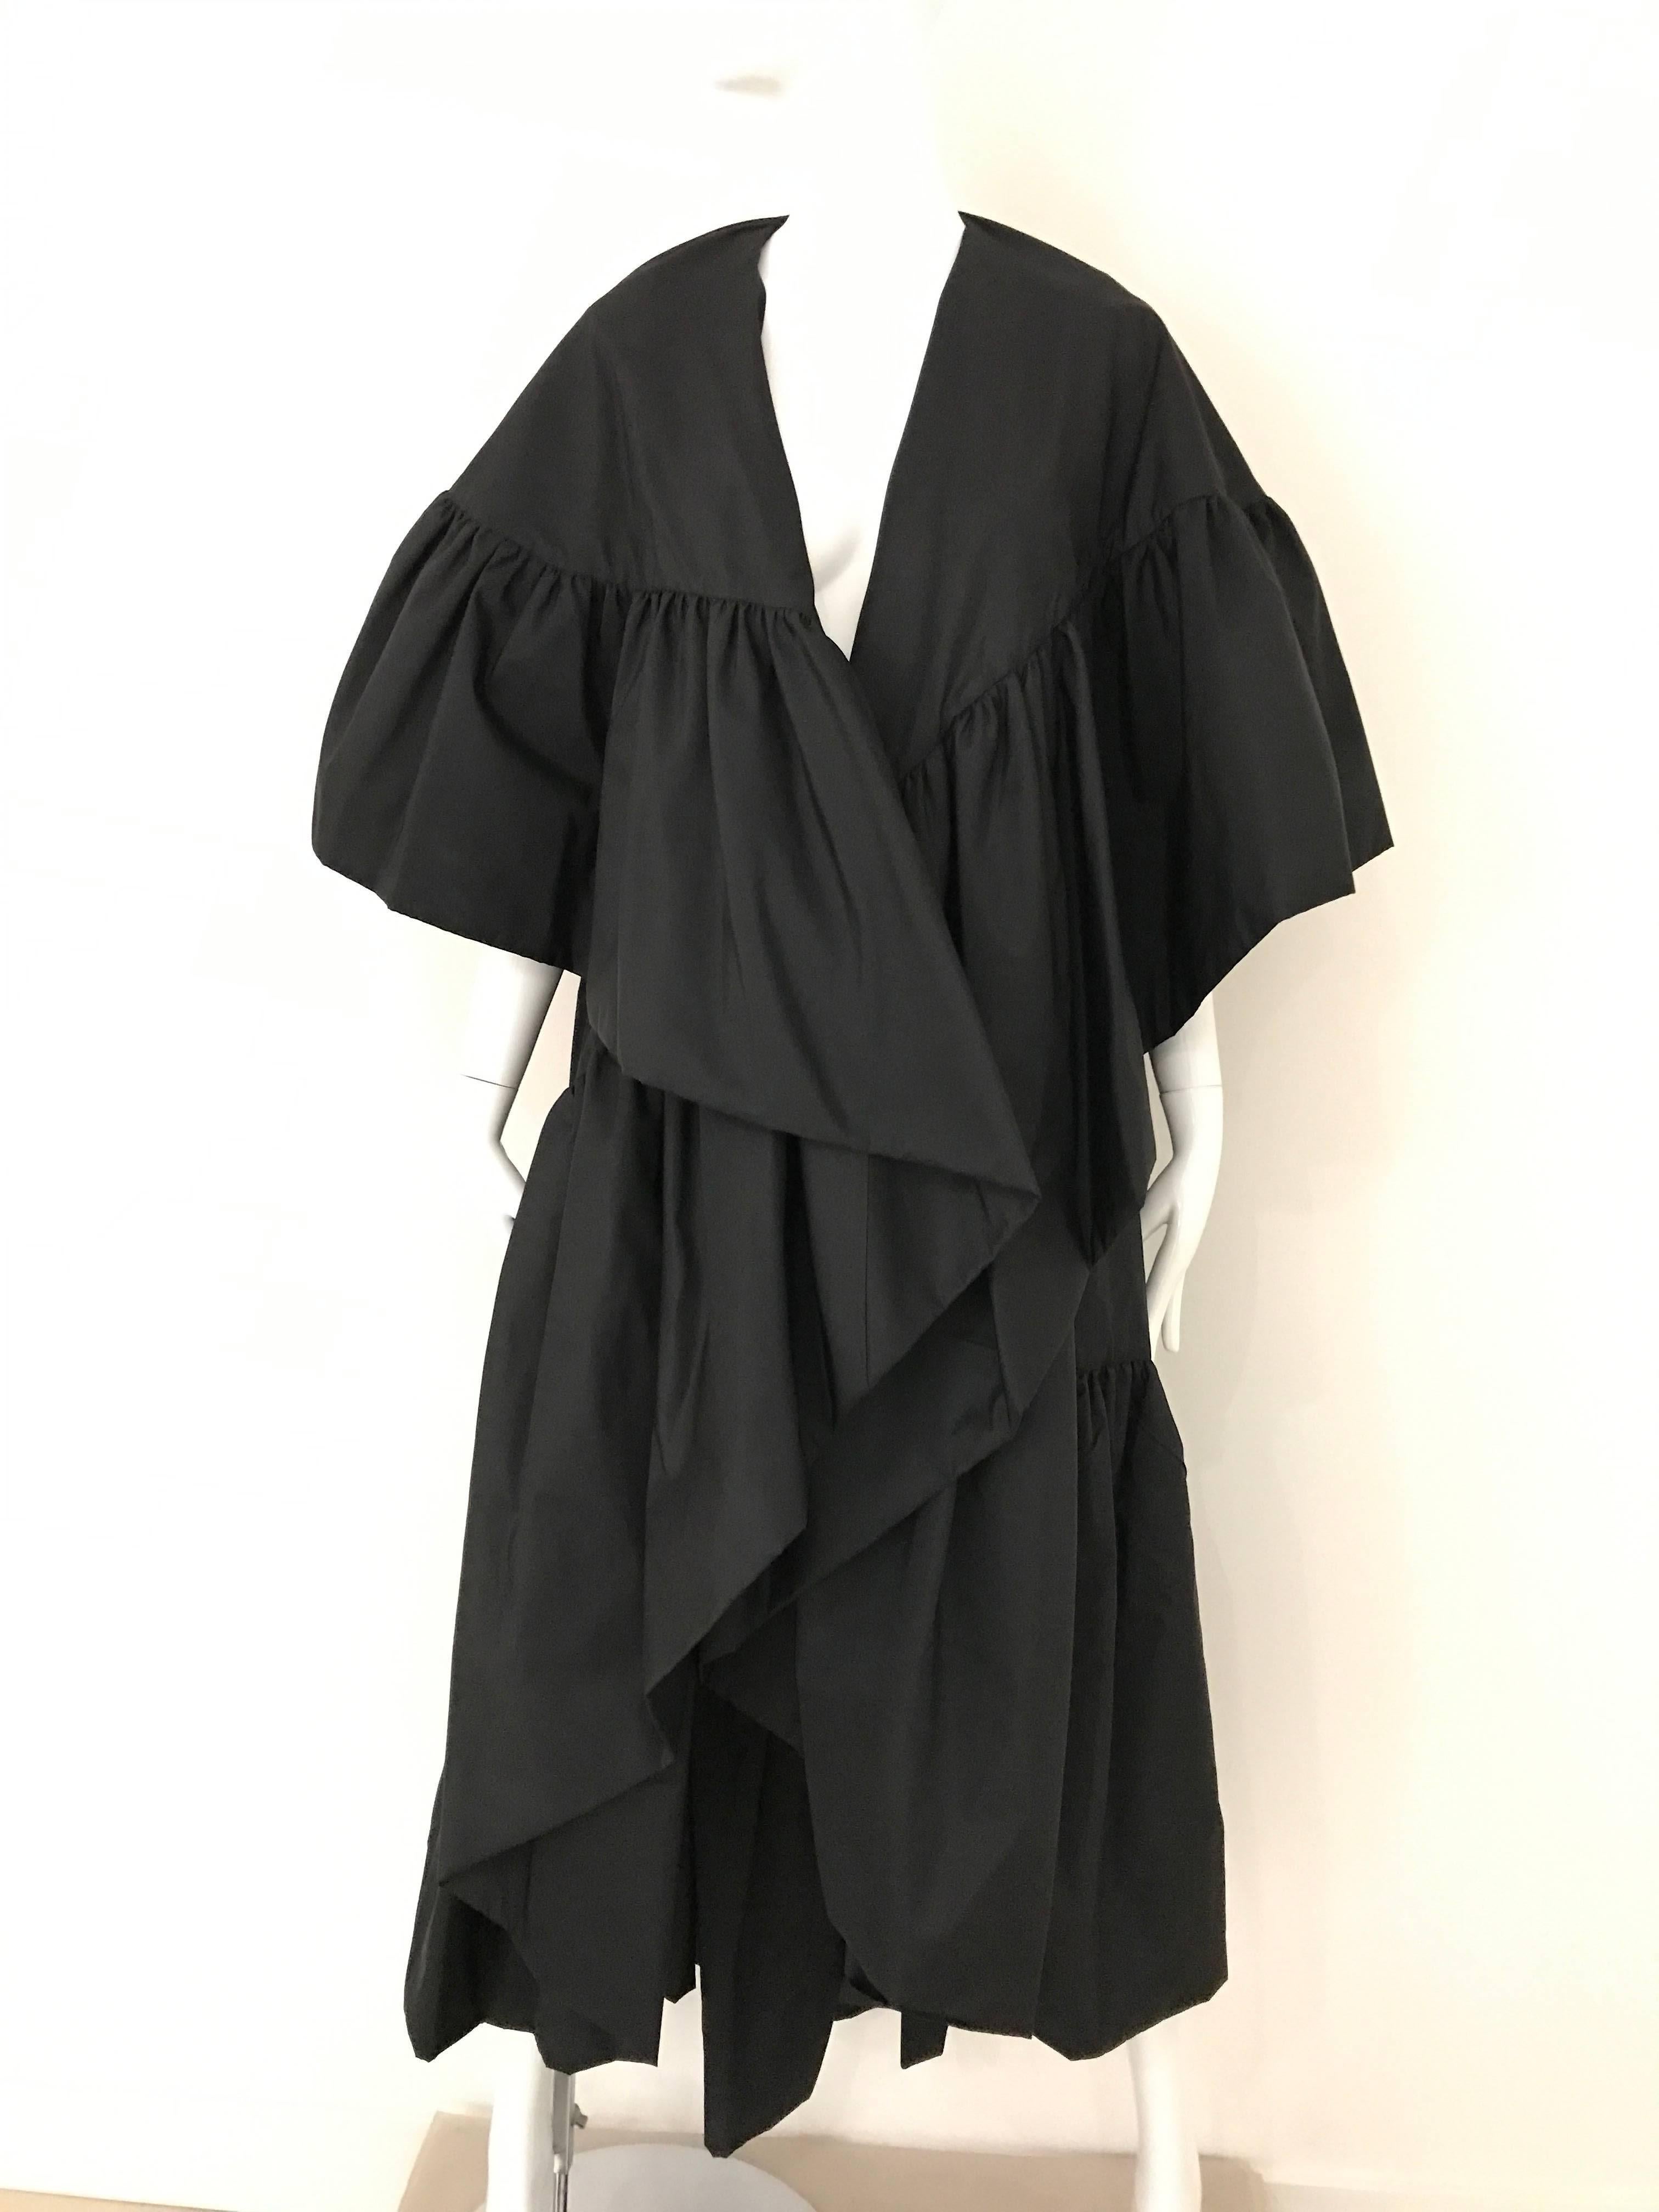 Dramatic Vintage 80s Richilene Silk Taffeta Ruffle evening opera cape coat. 
Cape/ coat has no fastener. Styled with Judith Leiber belt available for purchase at sielian's vintage 1stdibs store. 
Fit SMALL - MEDIUM 4/6/8

**** This Garment has been